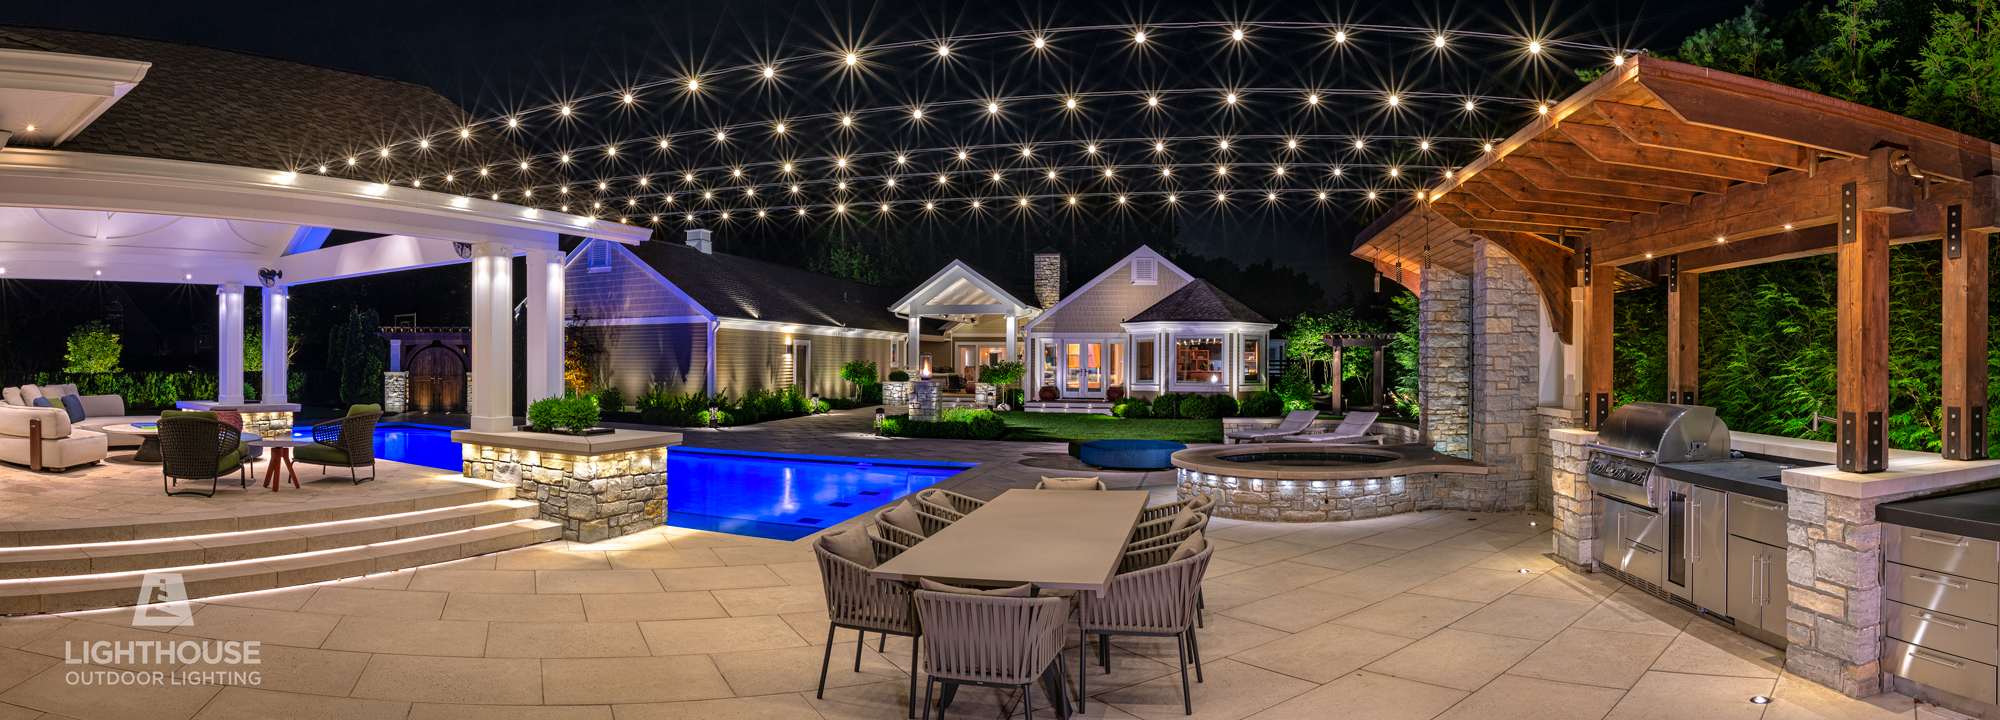 Patio String Lighting in League , TX